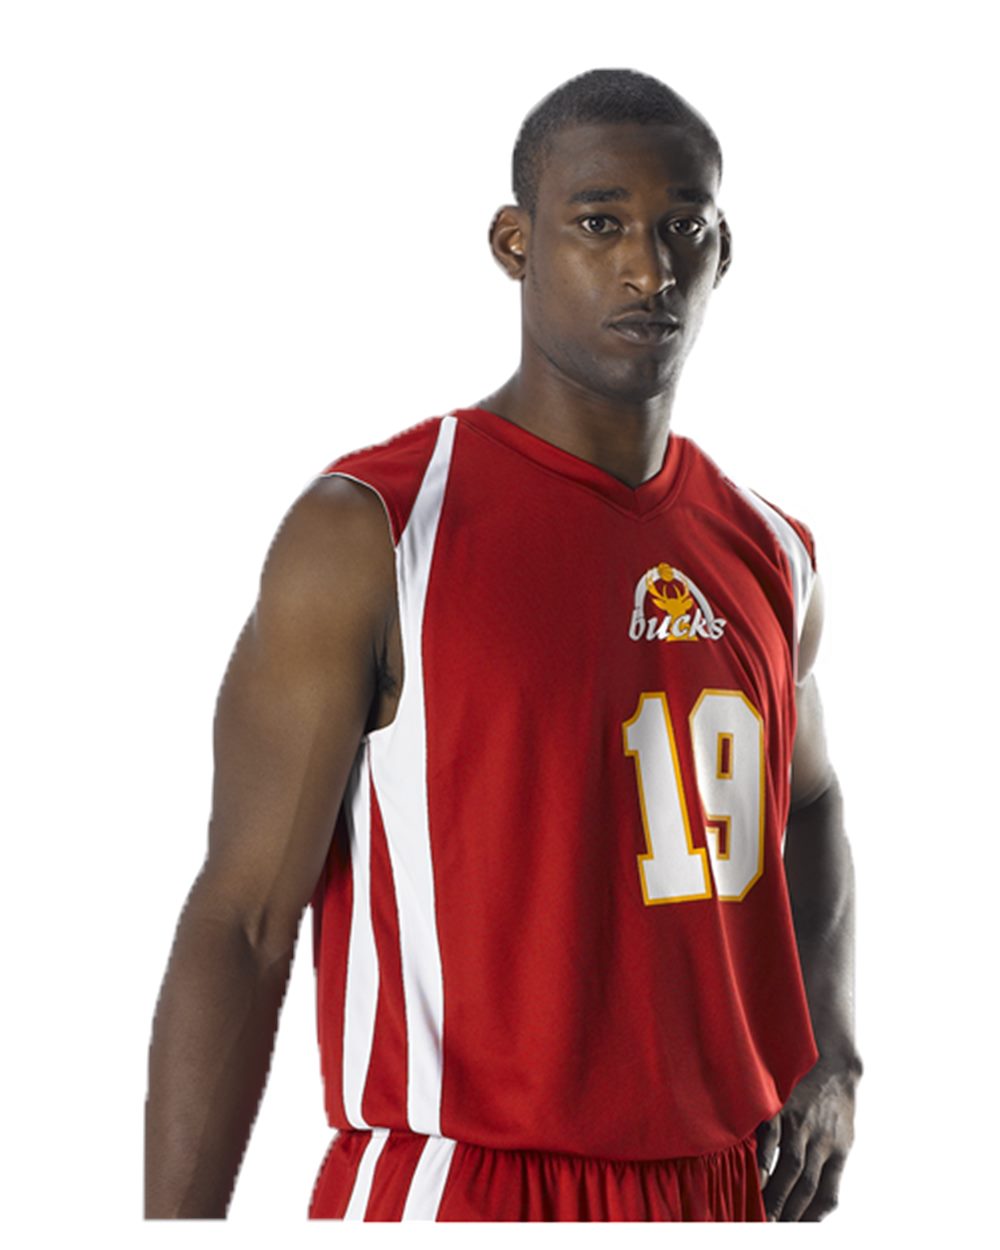 alleson reversible basketball jersey